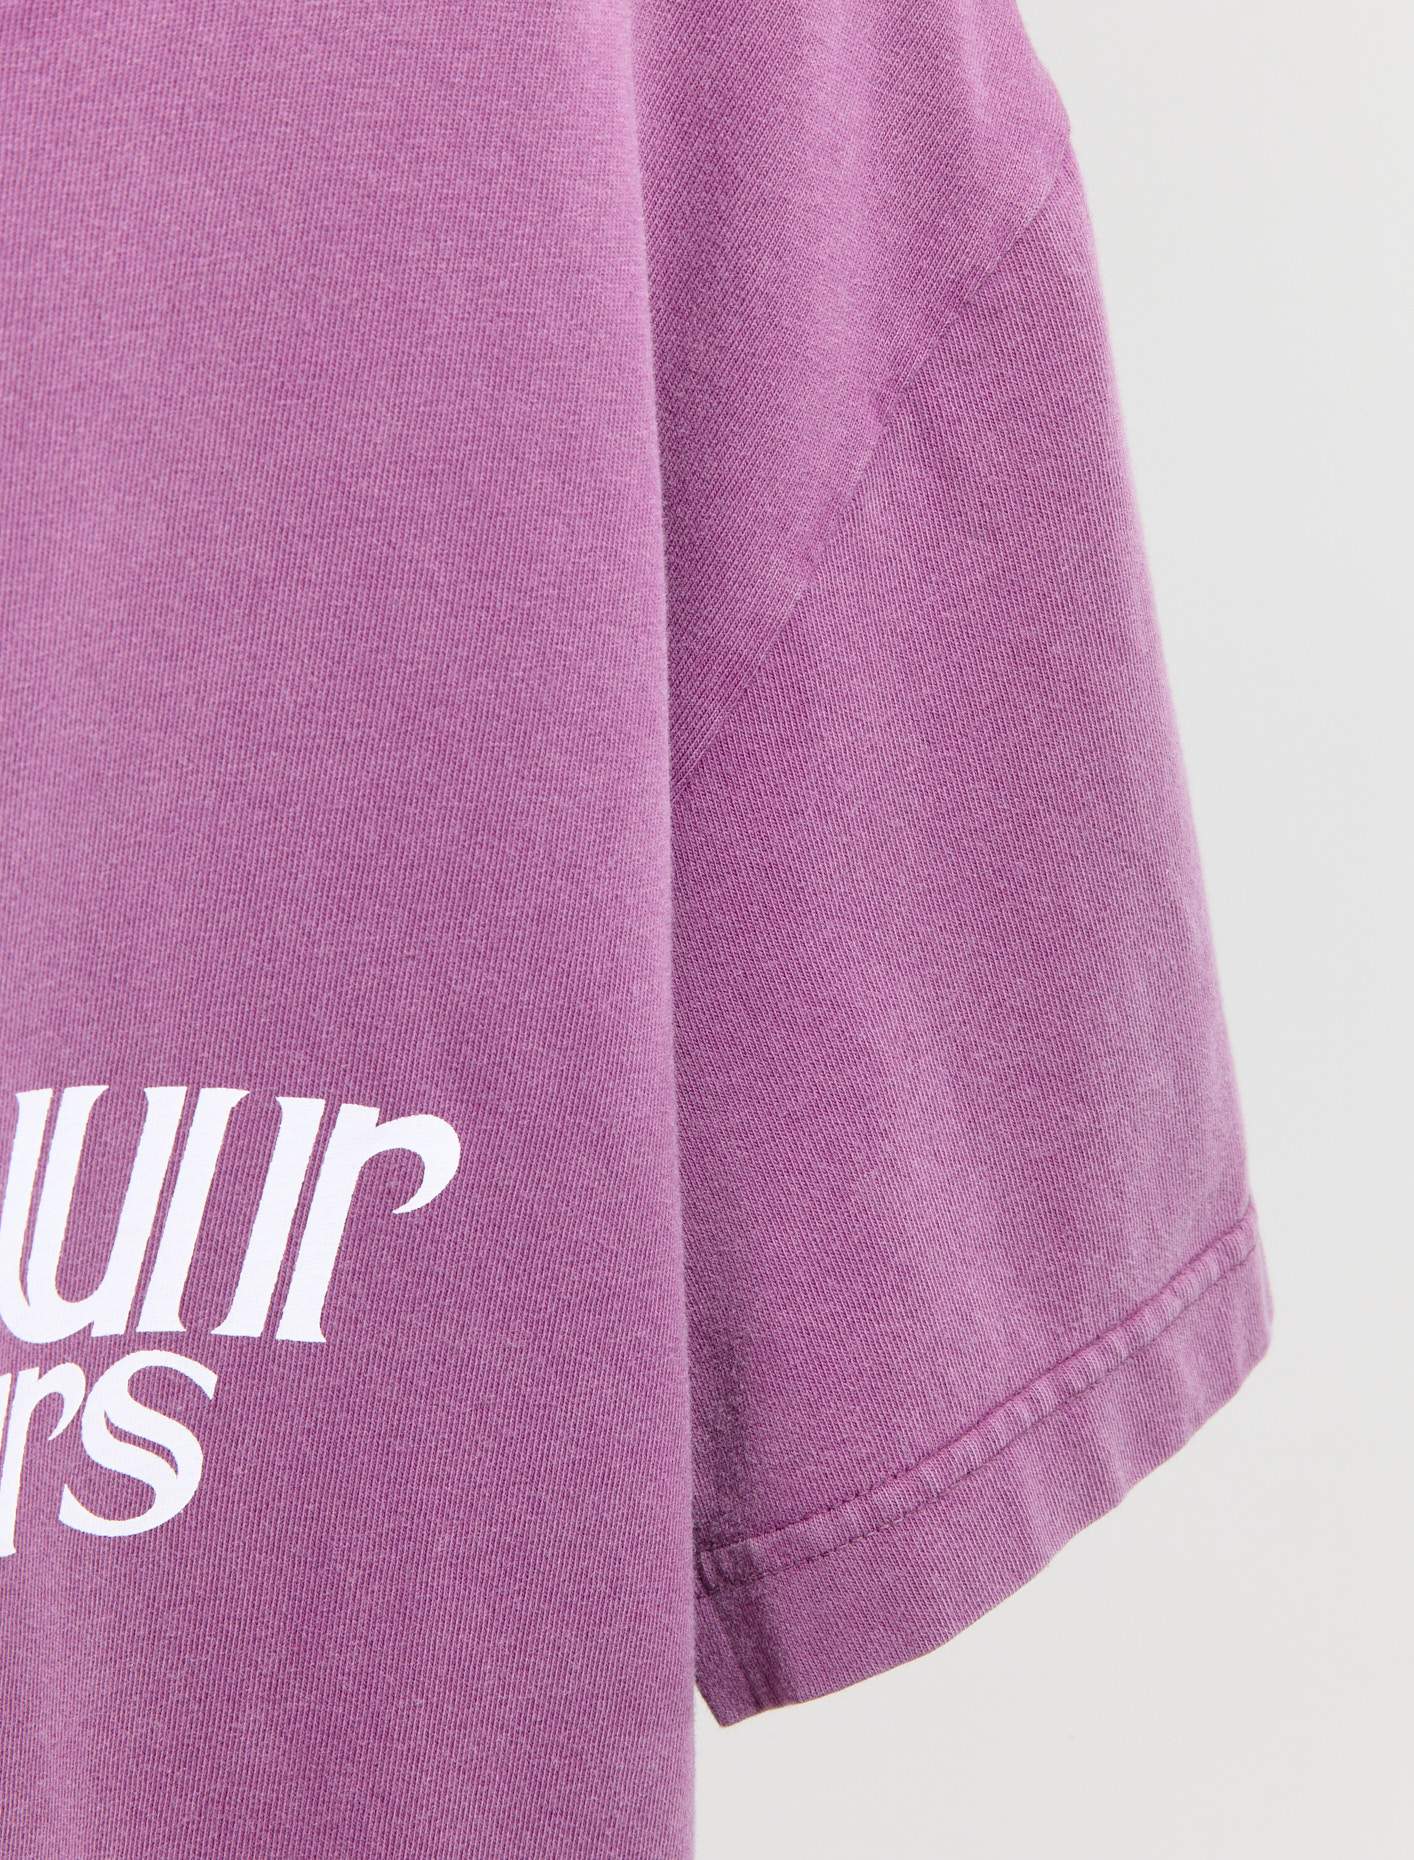 Amour Toujours T-Shirt in Washed Purple